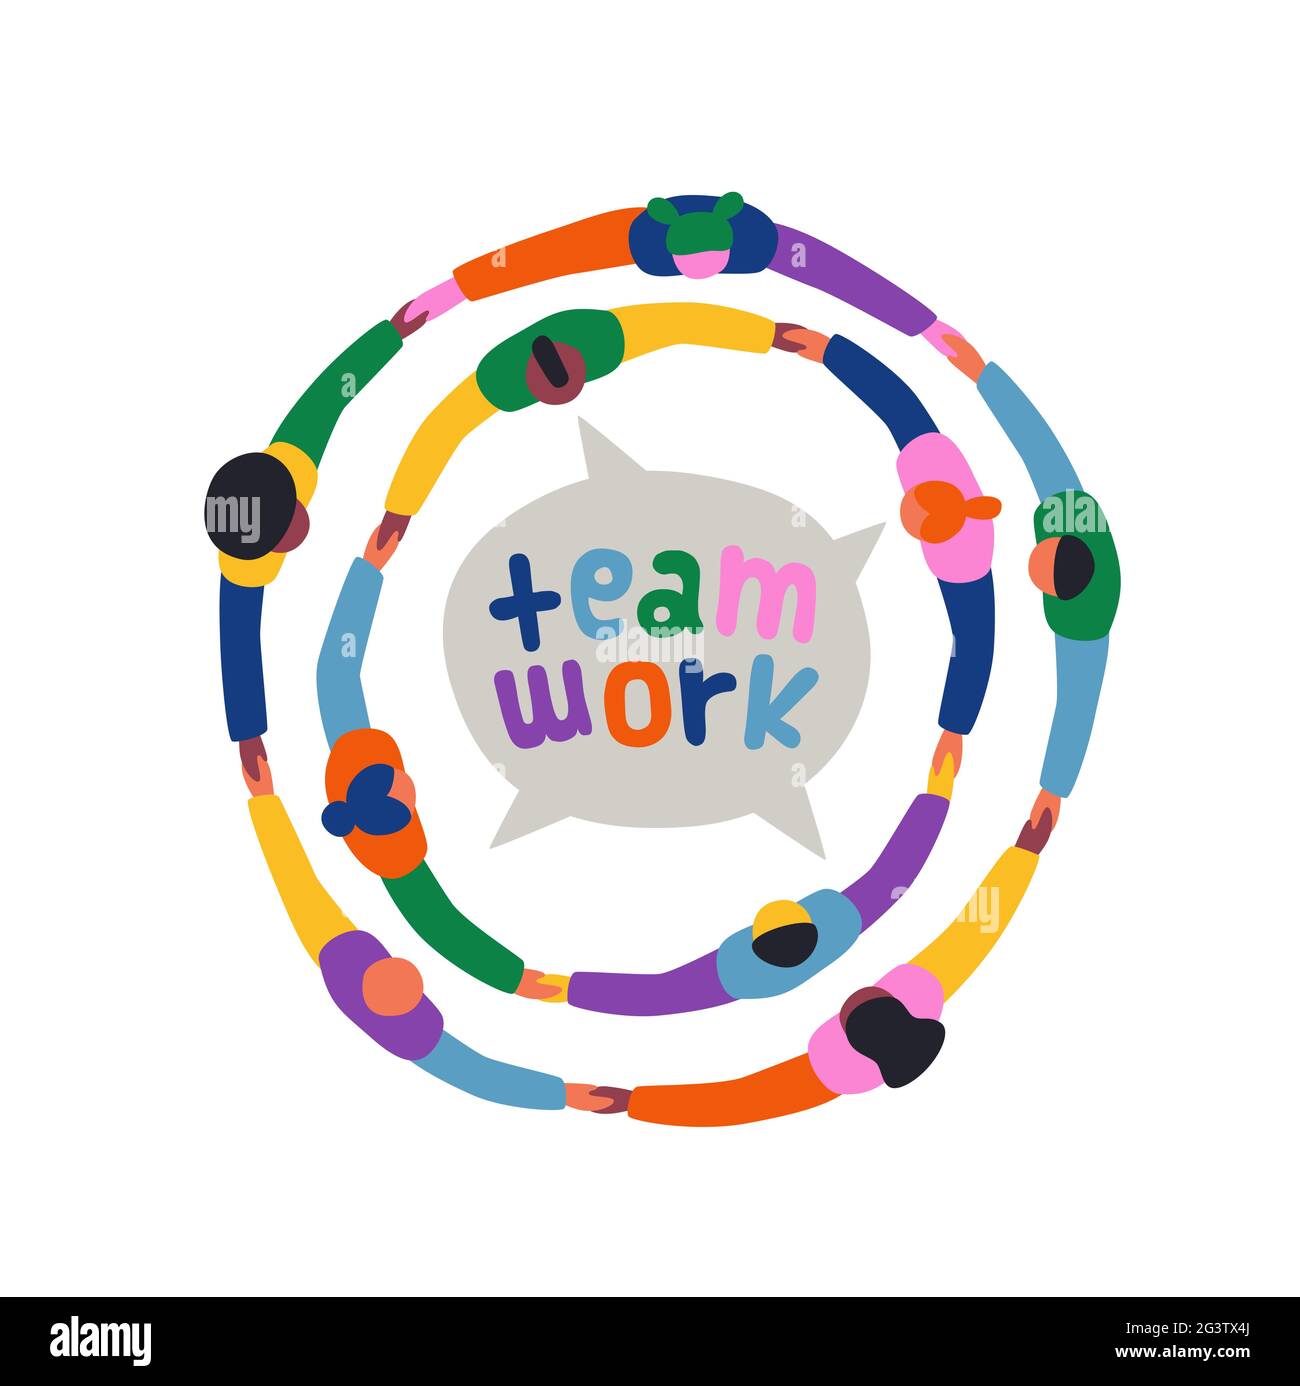 Teamwork illustration concept of colorful diverse people group holding hands together in big round circle. Different culture community, business partn Stock Vector